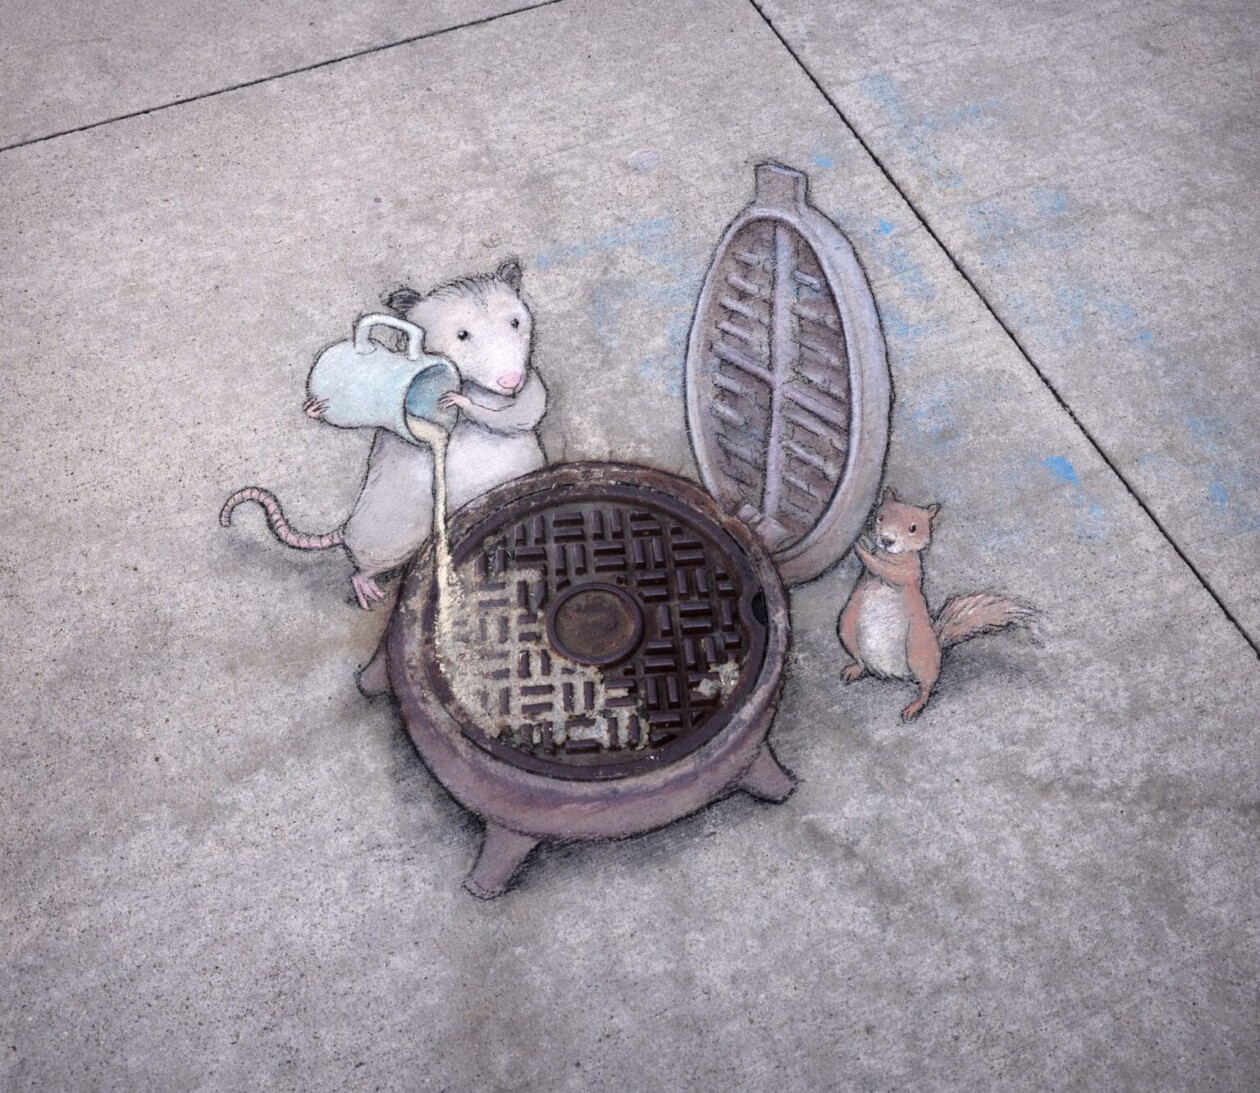 Playful Characters Drawn On Everyday Streets By David Zinn (10)